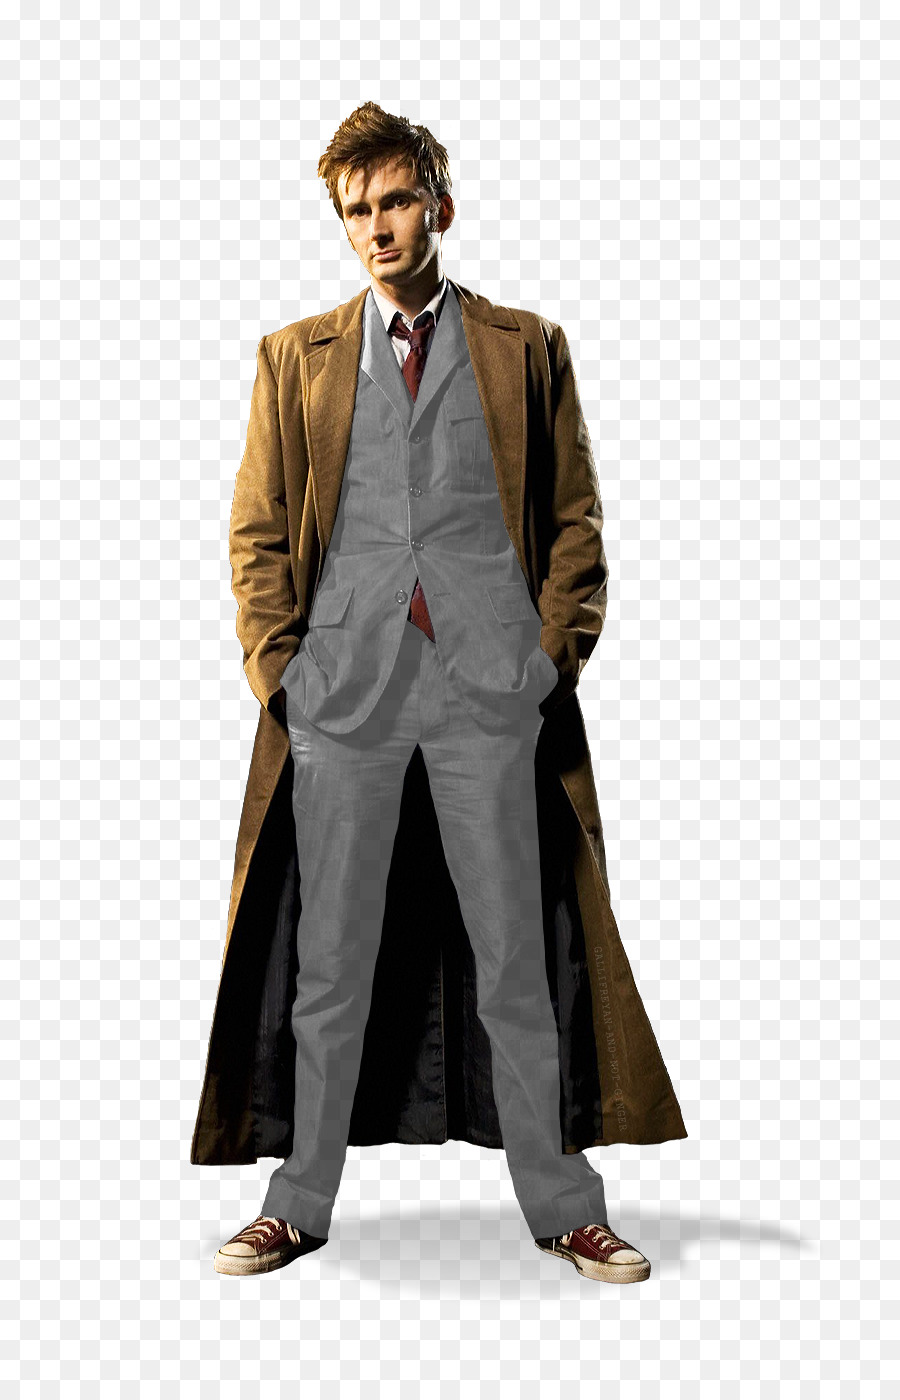 Tenth Doctor Eleventh Doctor First Doctor The Comedy of Errors - the doctor png download - 800*1395 - Free Transparent Tenth Doctor png Download.